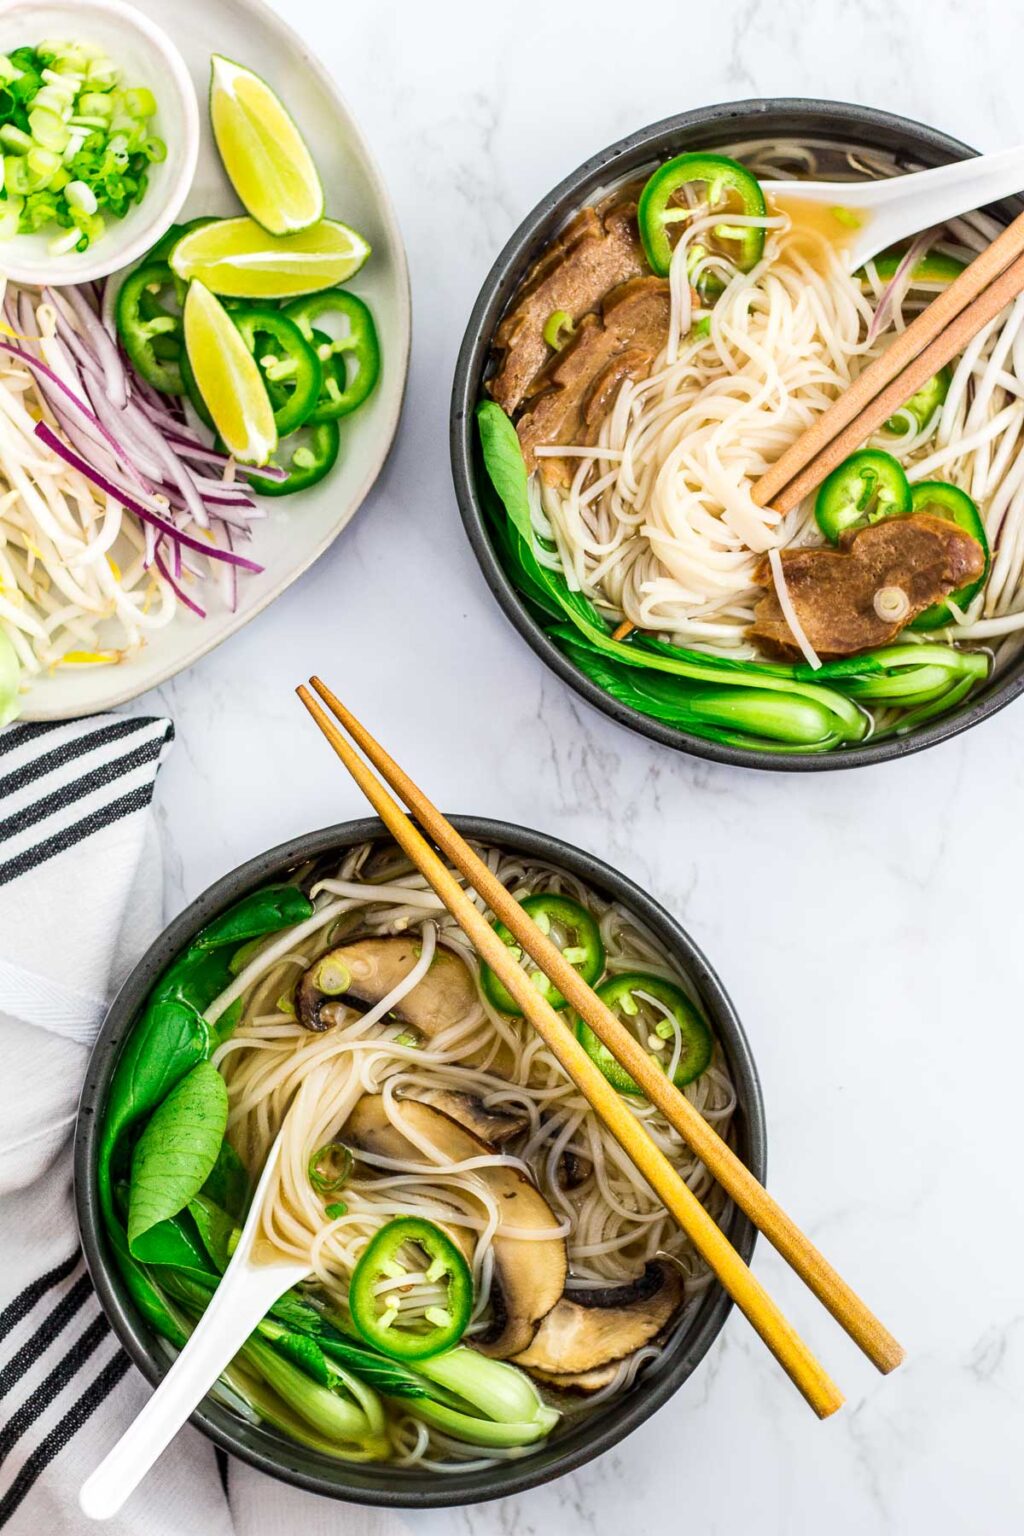 How to make Vegan Pho (Pho Chay) - My Eclectic Bites